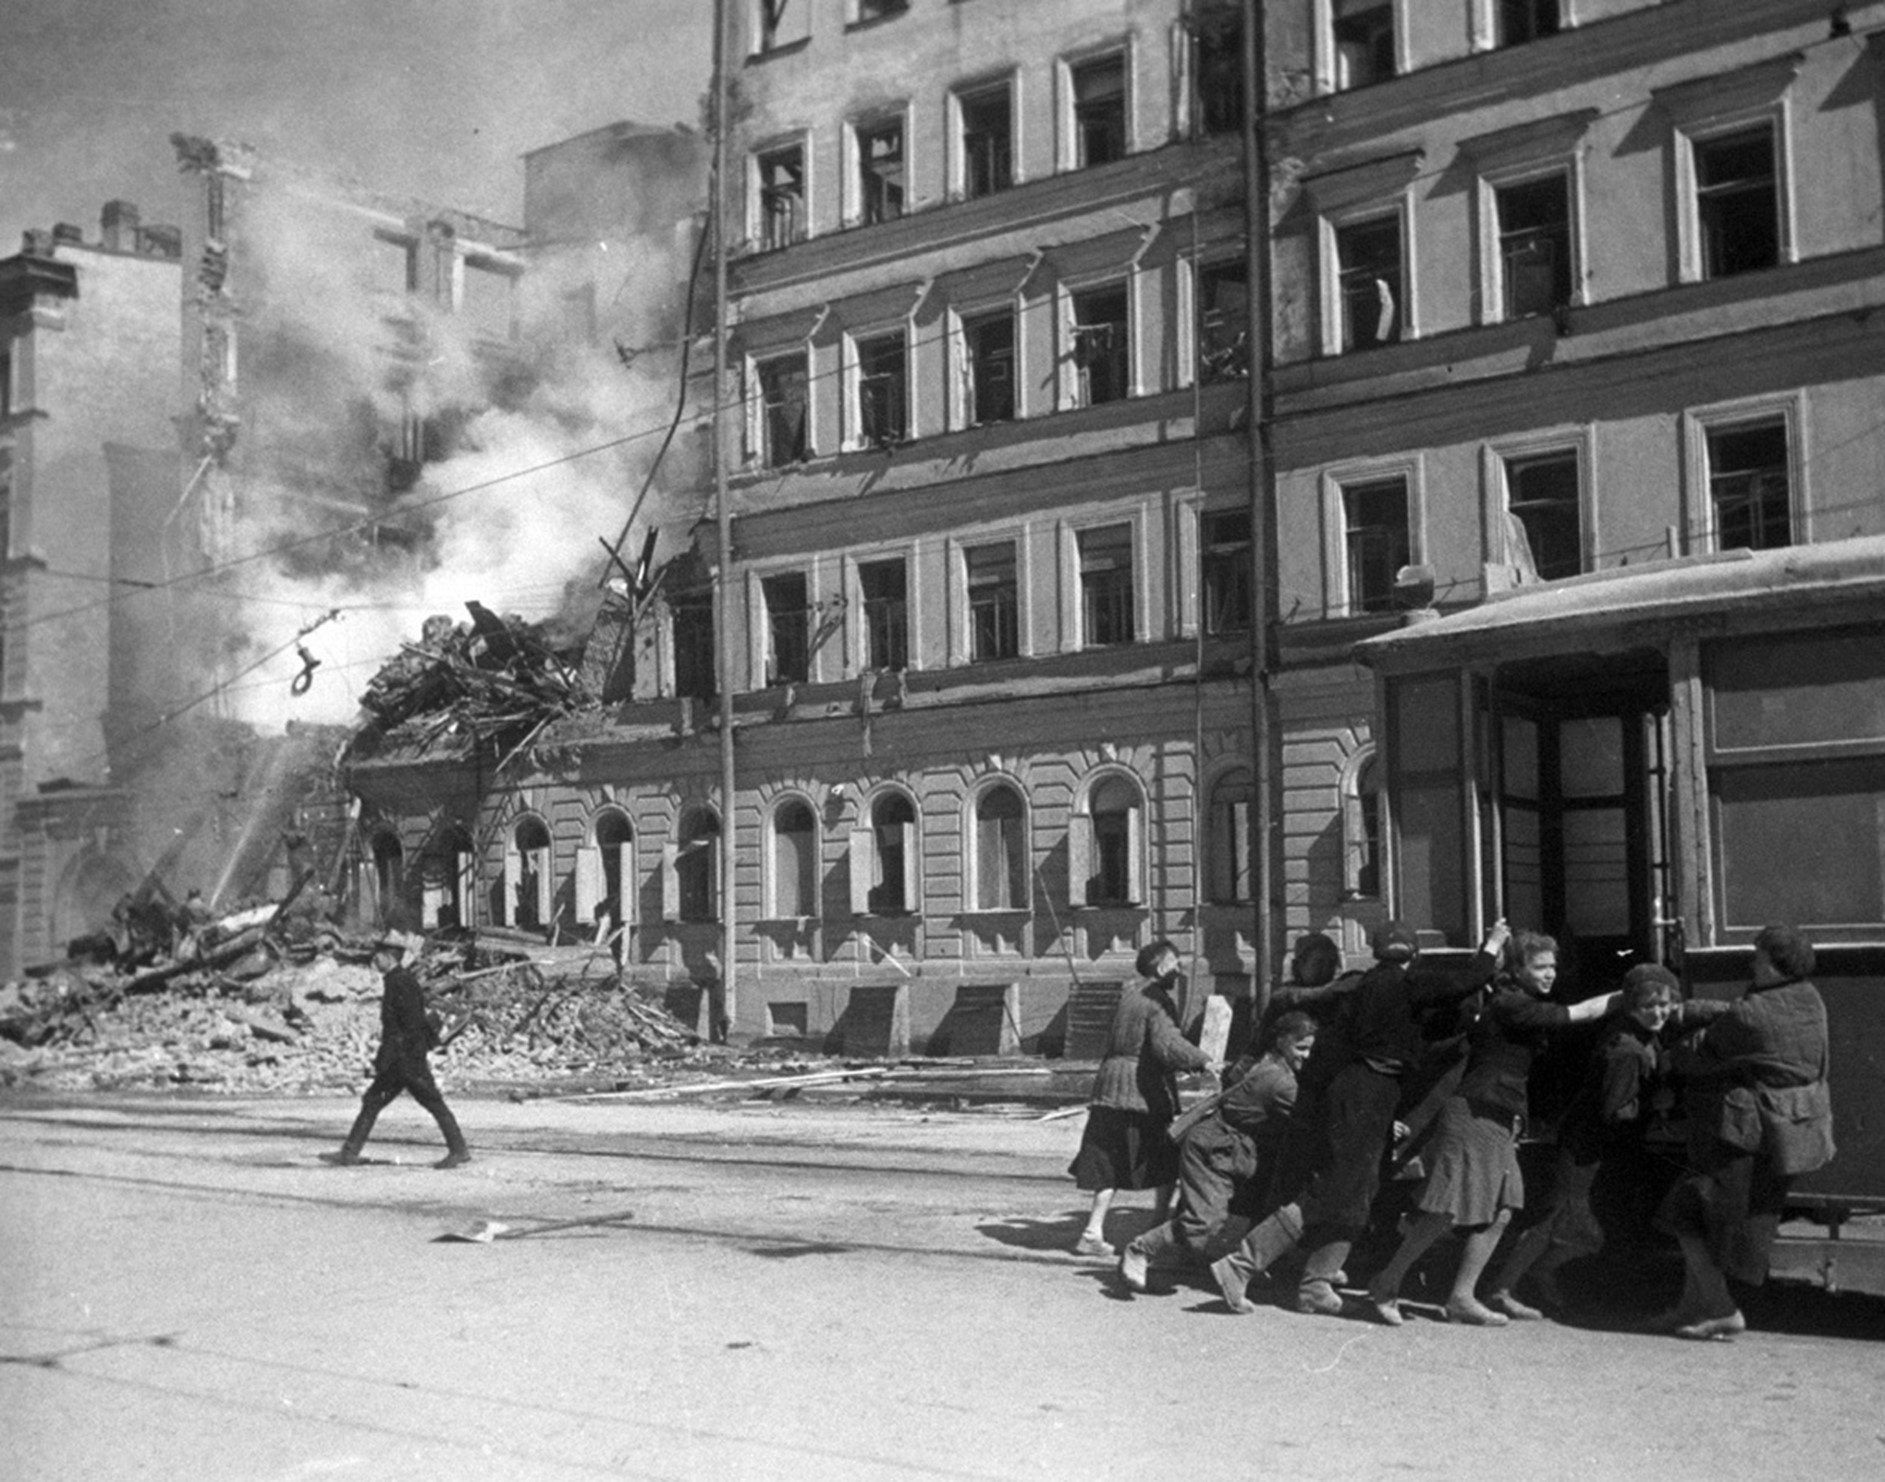 A street in Leningrad after German bombardment. Source